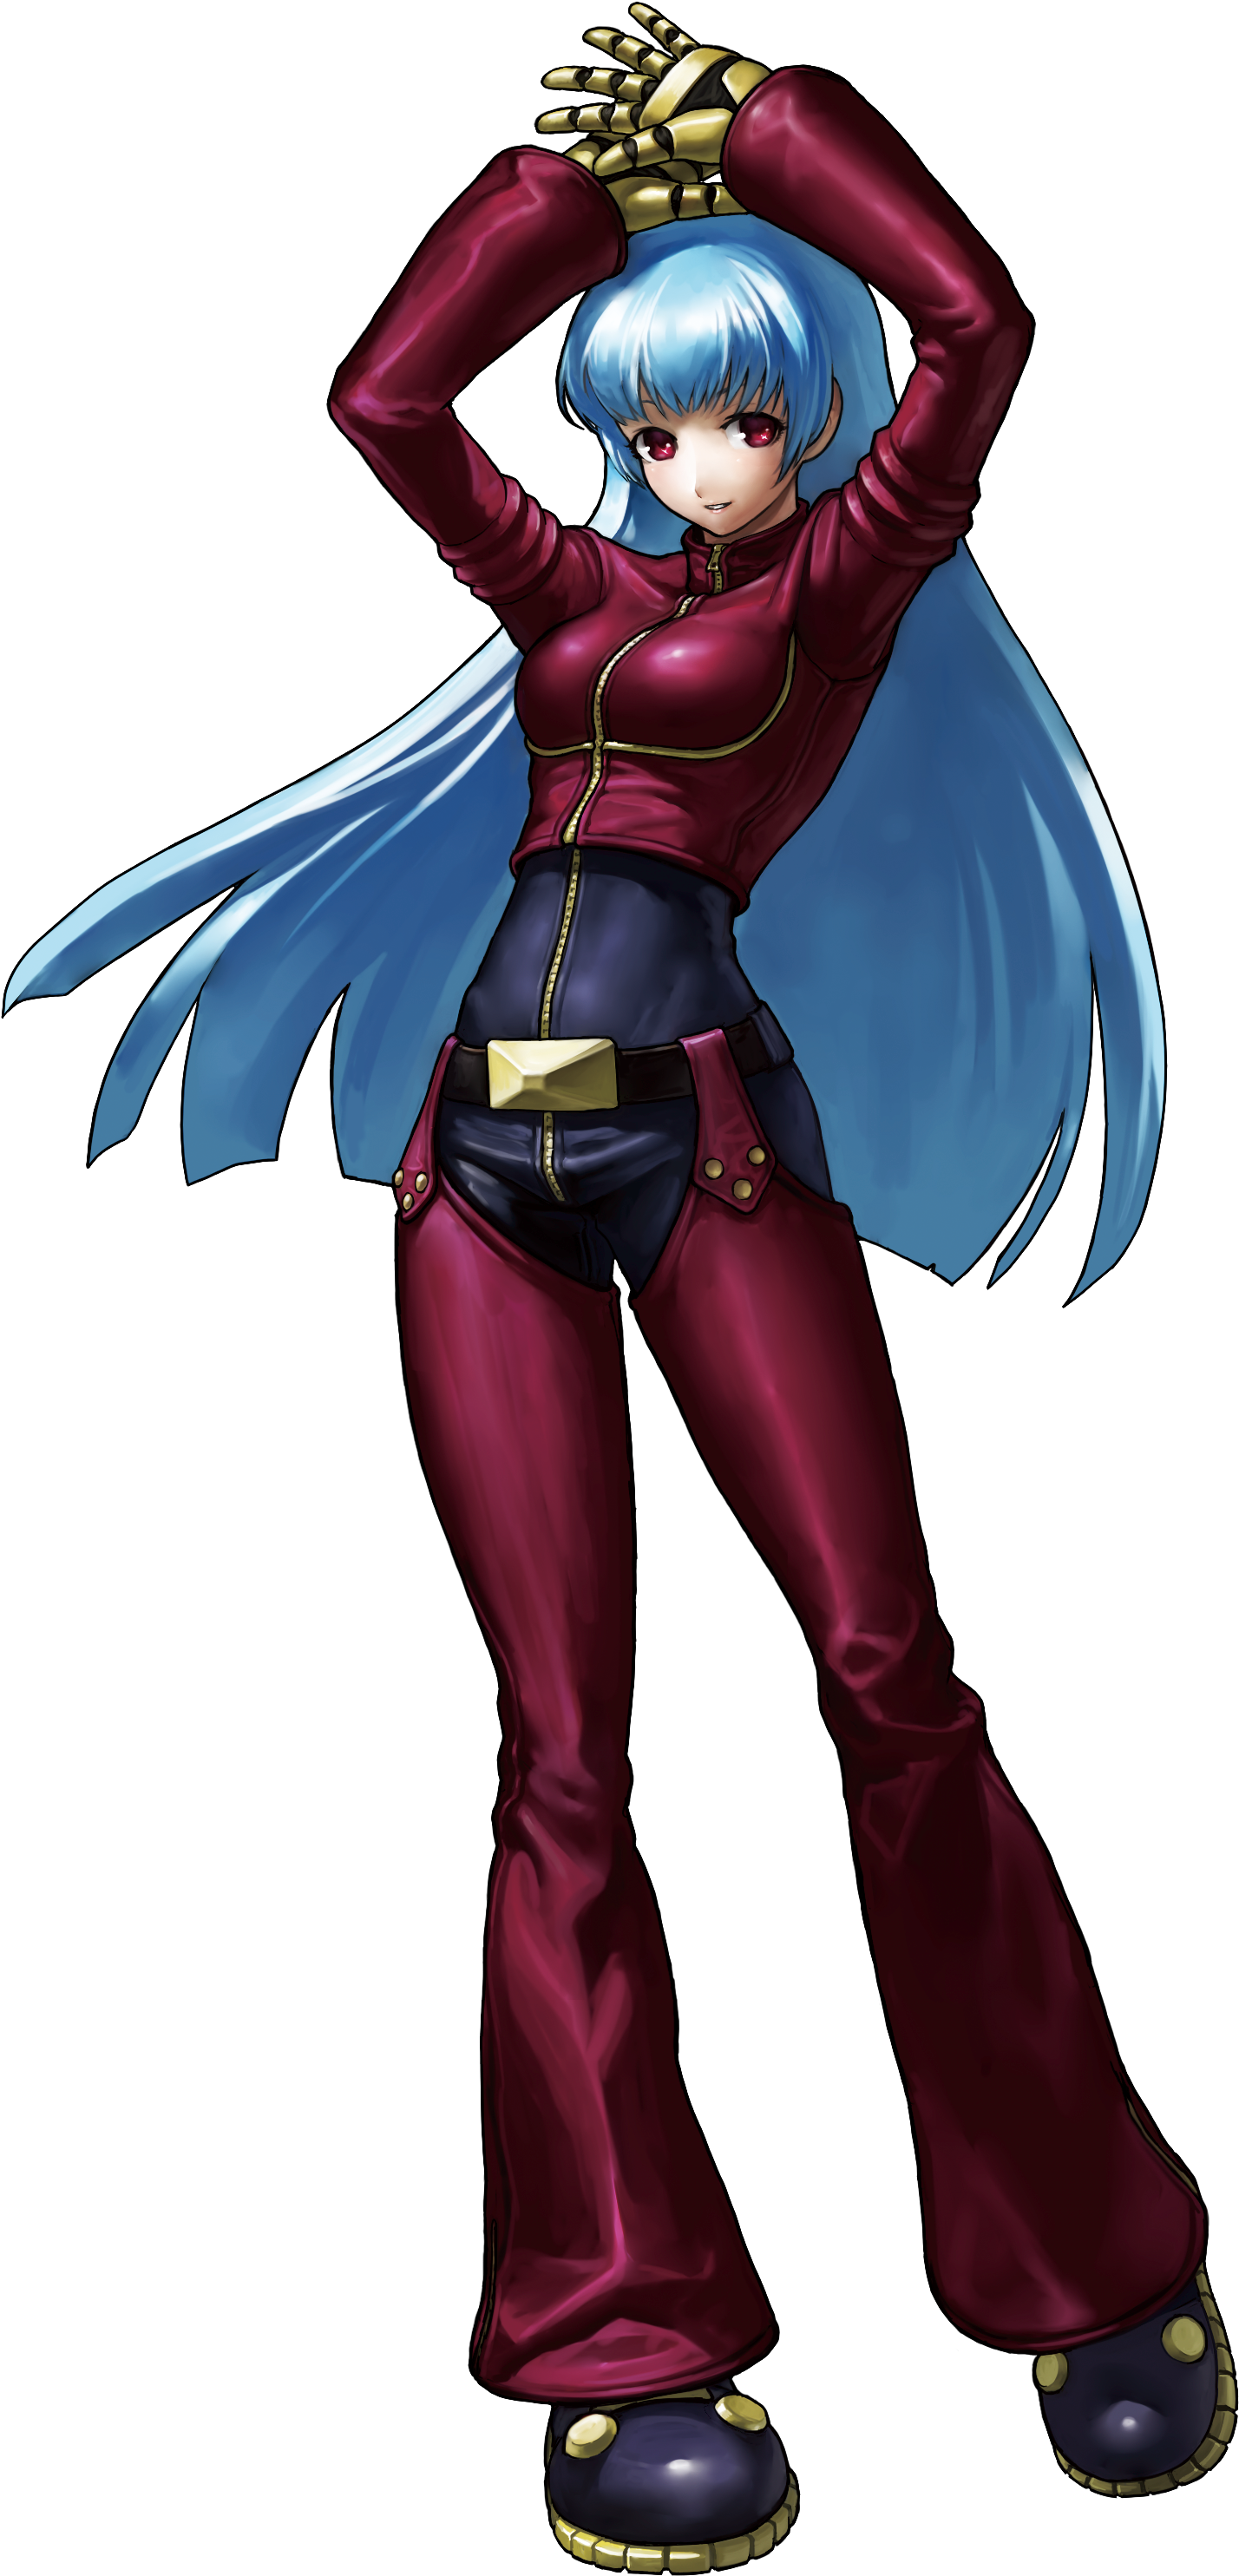 Kula Diamond Kof Xiii Official Render Game Art - King Of Fighters 13 Characters (1620x3057)